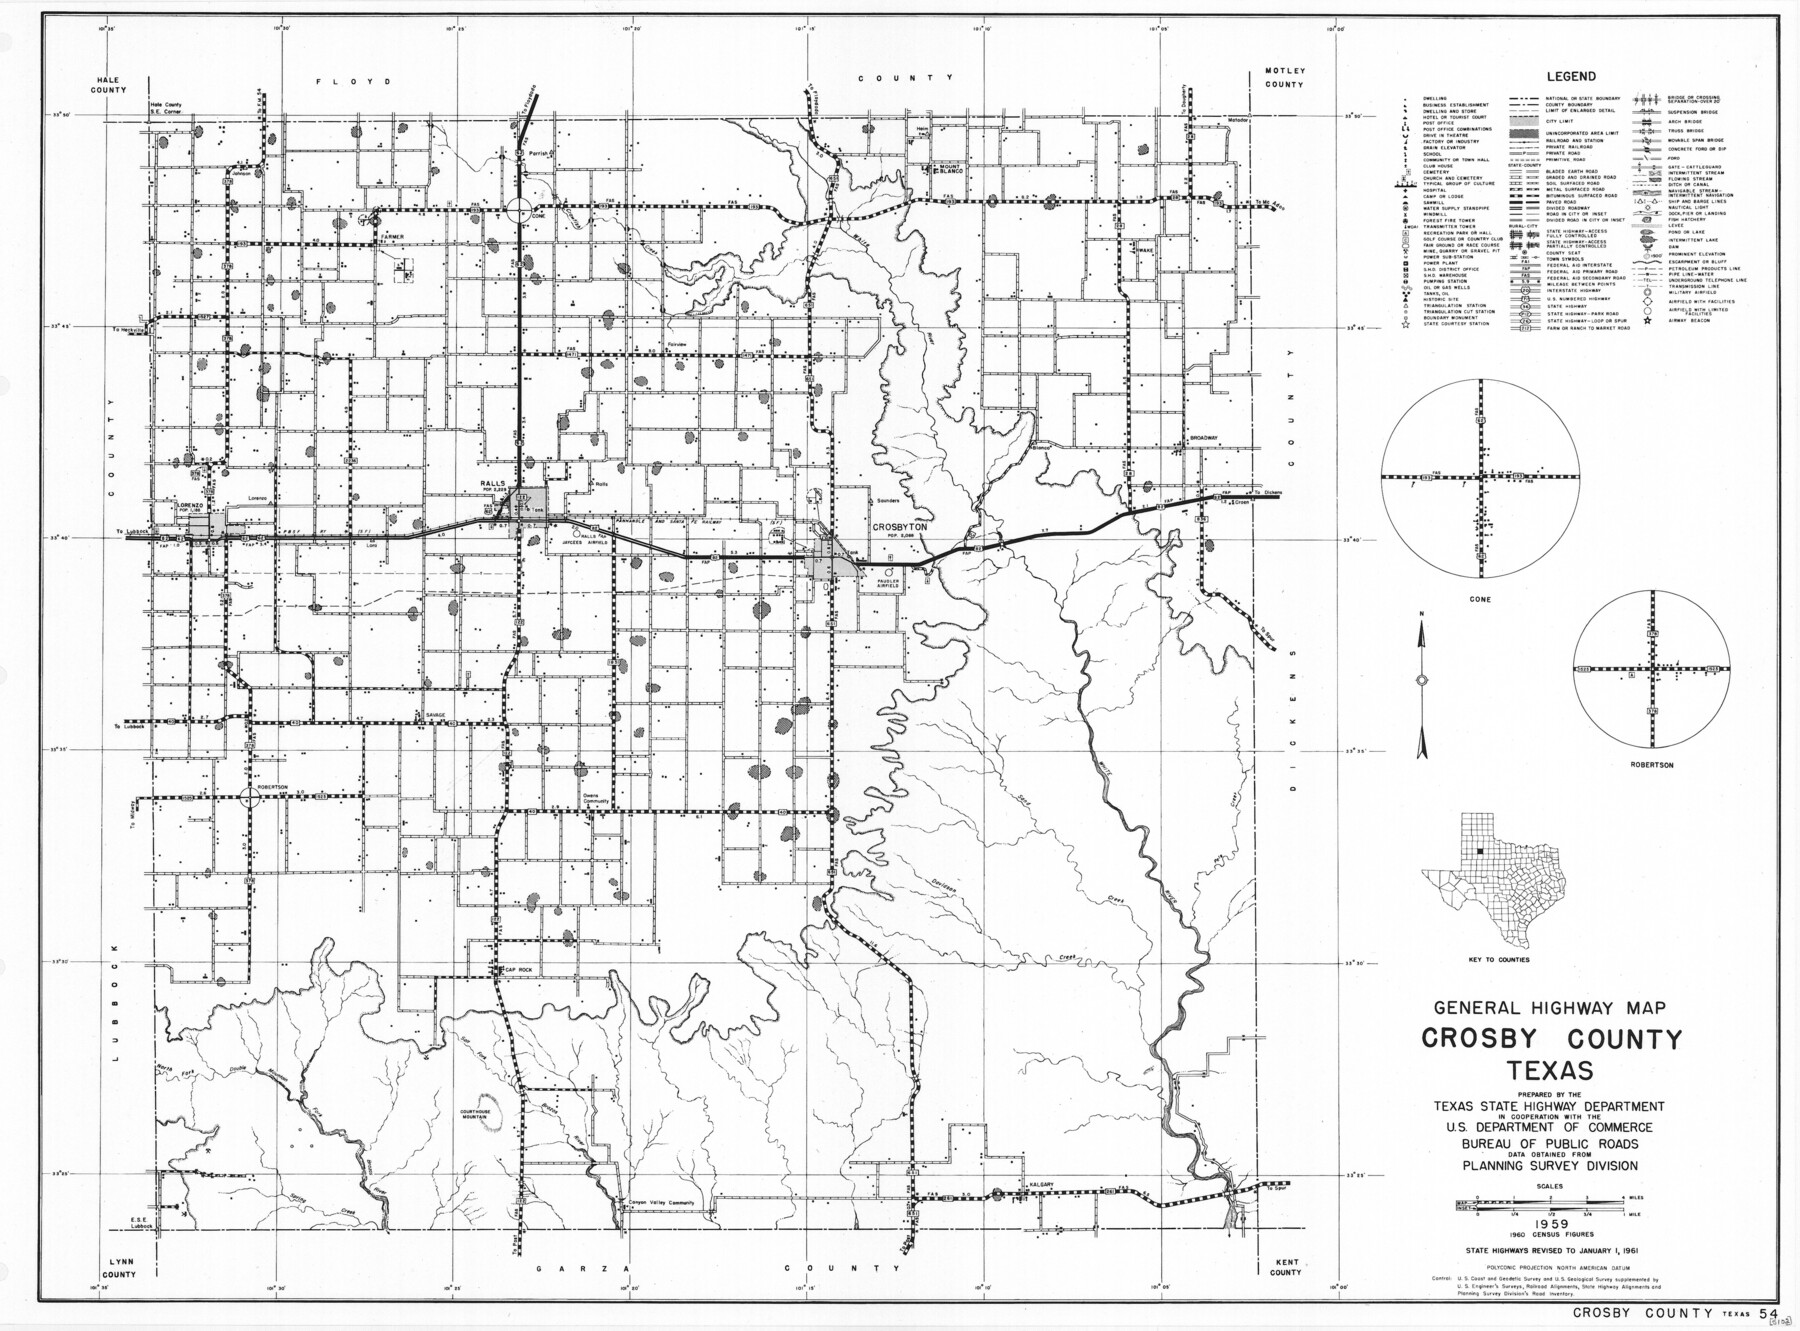 79426, General Highway Map, Crosby County, Texas, Texas State Library and Archives